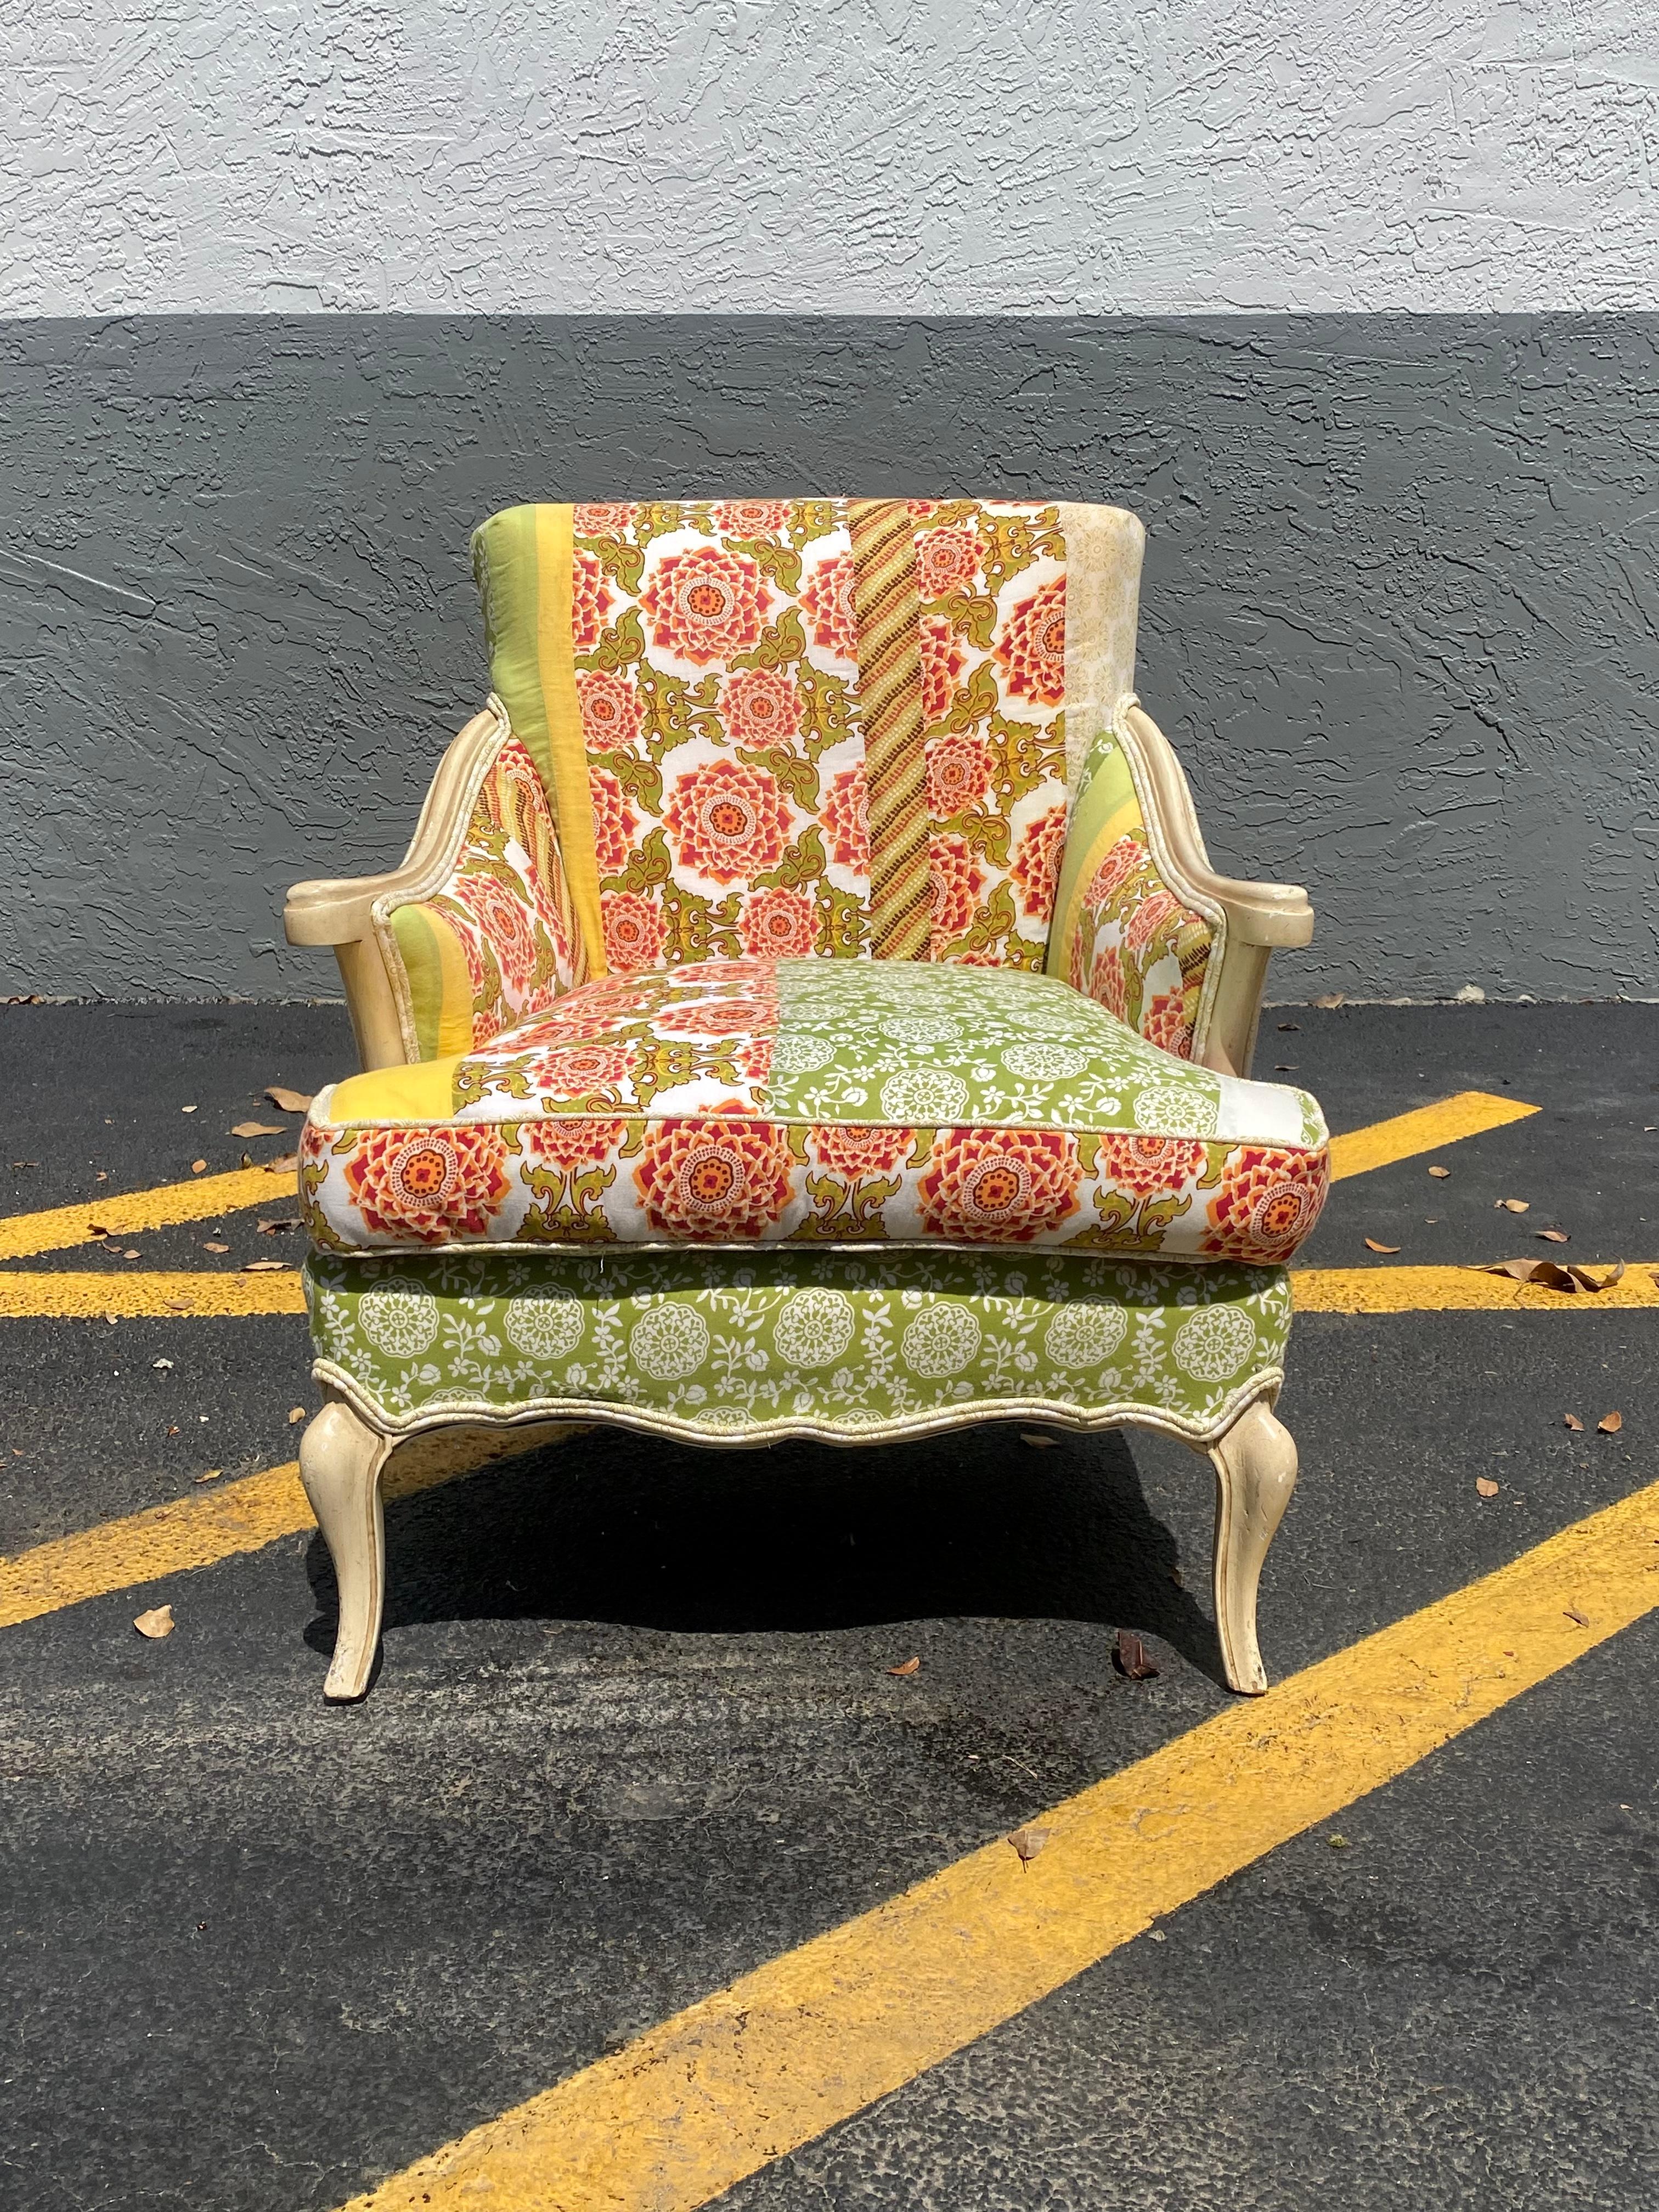 On offer on this occasion is one of the most stunning, floral patchwork you could hope to find. Outstanding design is exhibited throughout. The beautiful chair is statement piece which is also extremely comfortable and packed with personality!! Just